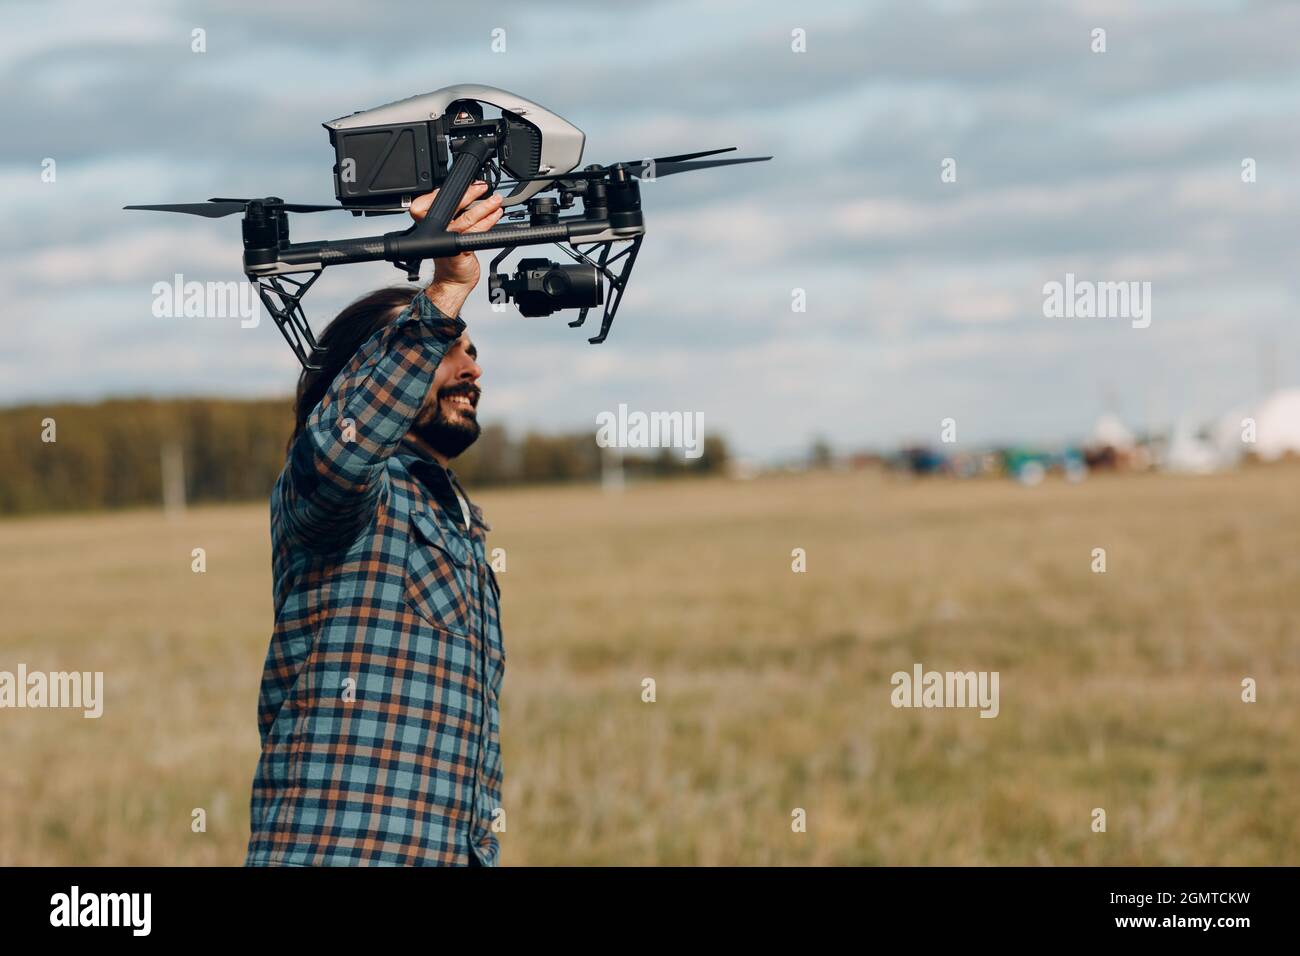 Man pilot holding DJI Inspire 2 quadcopter drone in hands at outside field  Stock Photo - Alamy